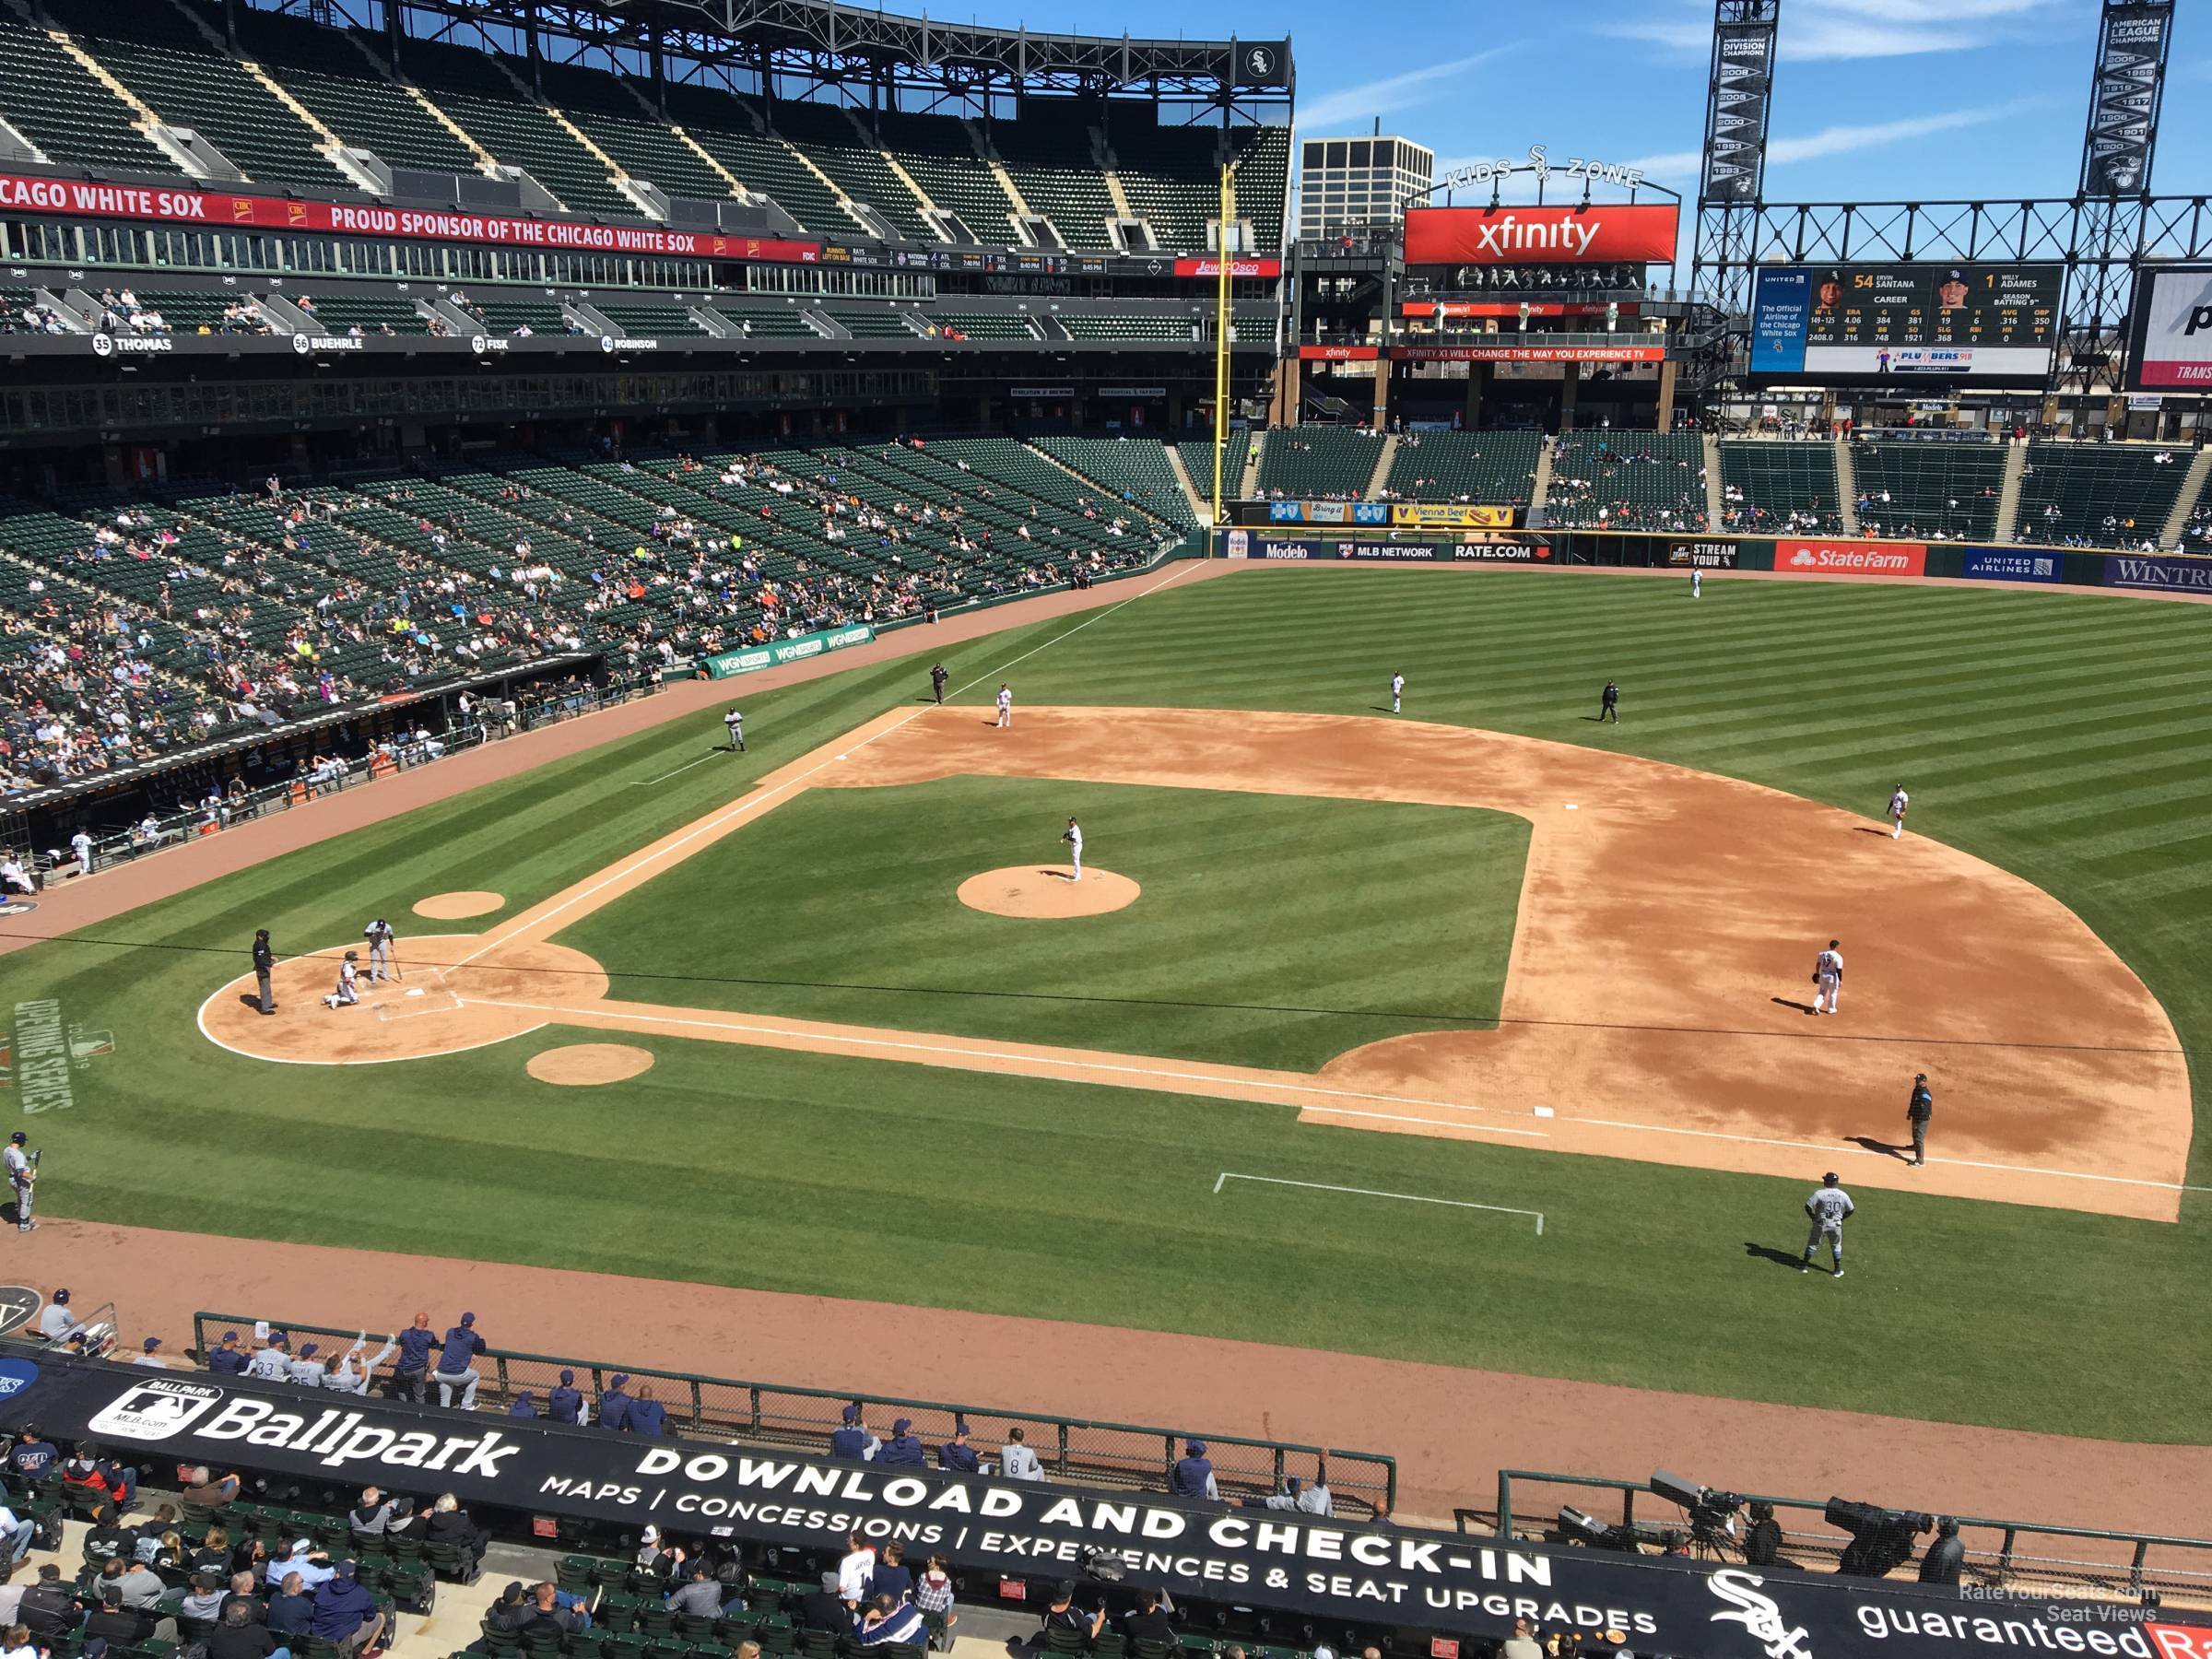 section 324, row 1 seat view  - guaranteed rate field